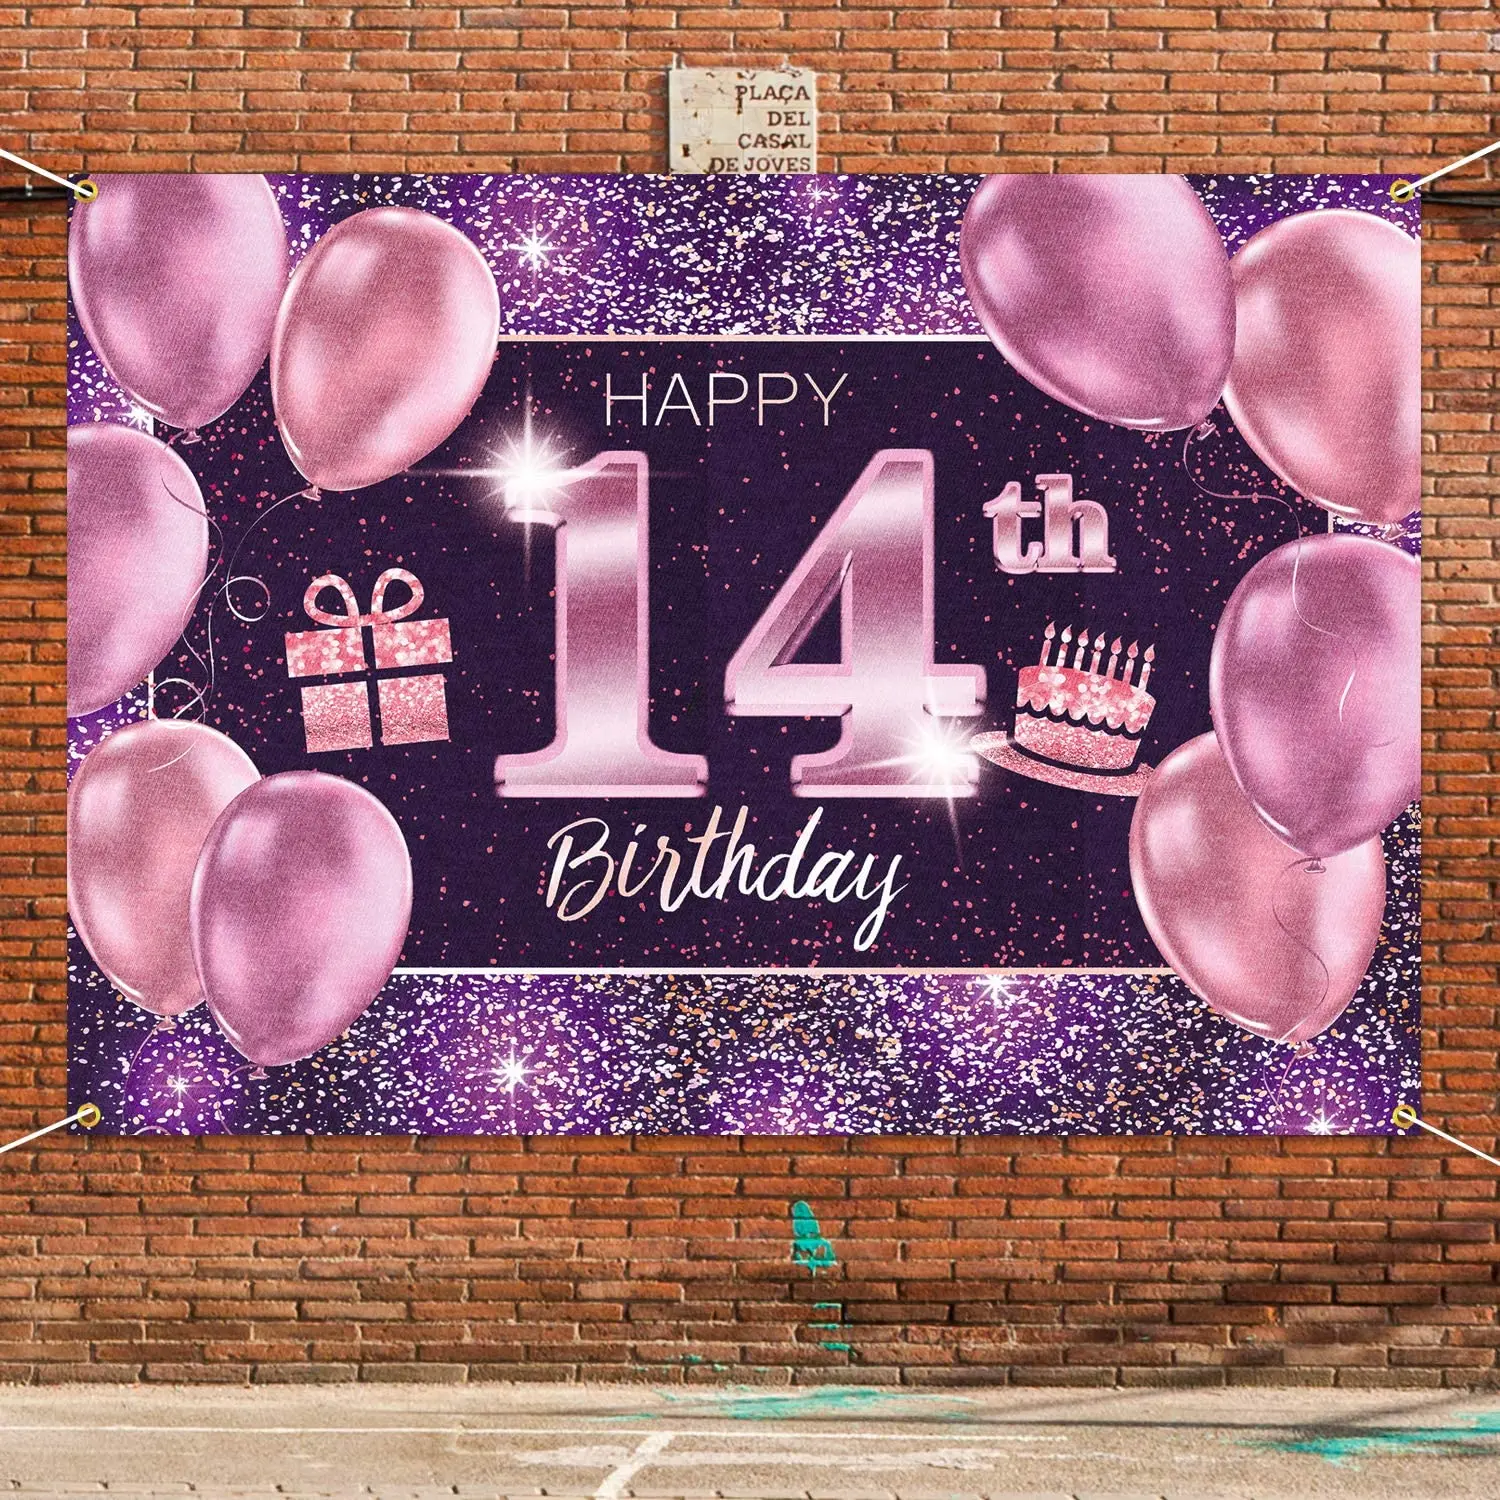 14th Birthday Banner Backdrop Decorations for Girl's Rose Gold Happy 14 Year Old Birthday Decor Photo Booth Props 14th Party Supplies